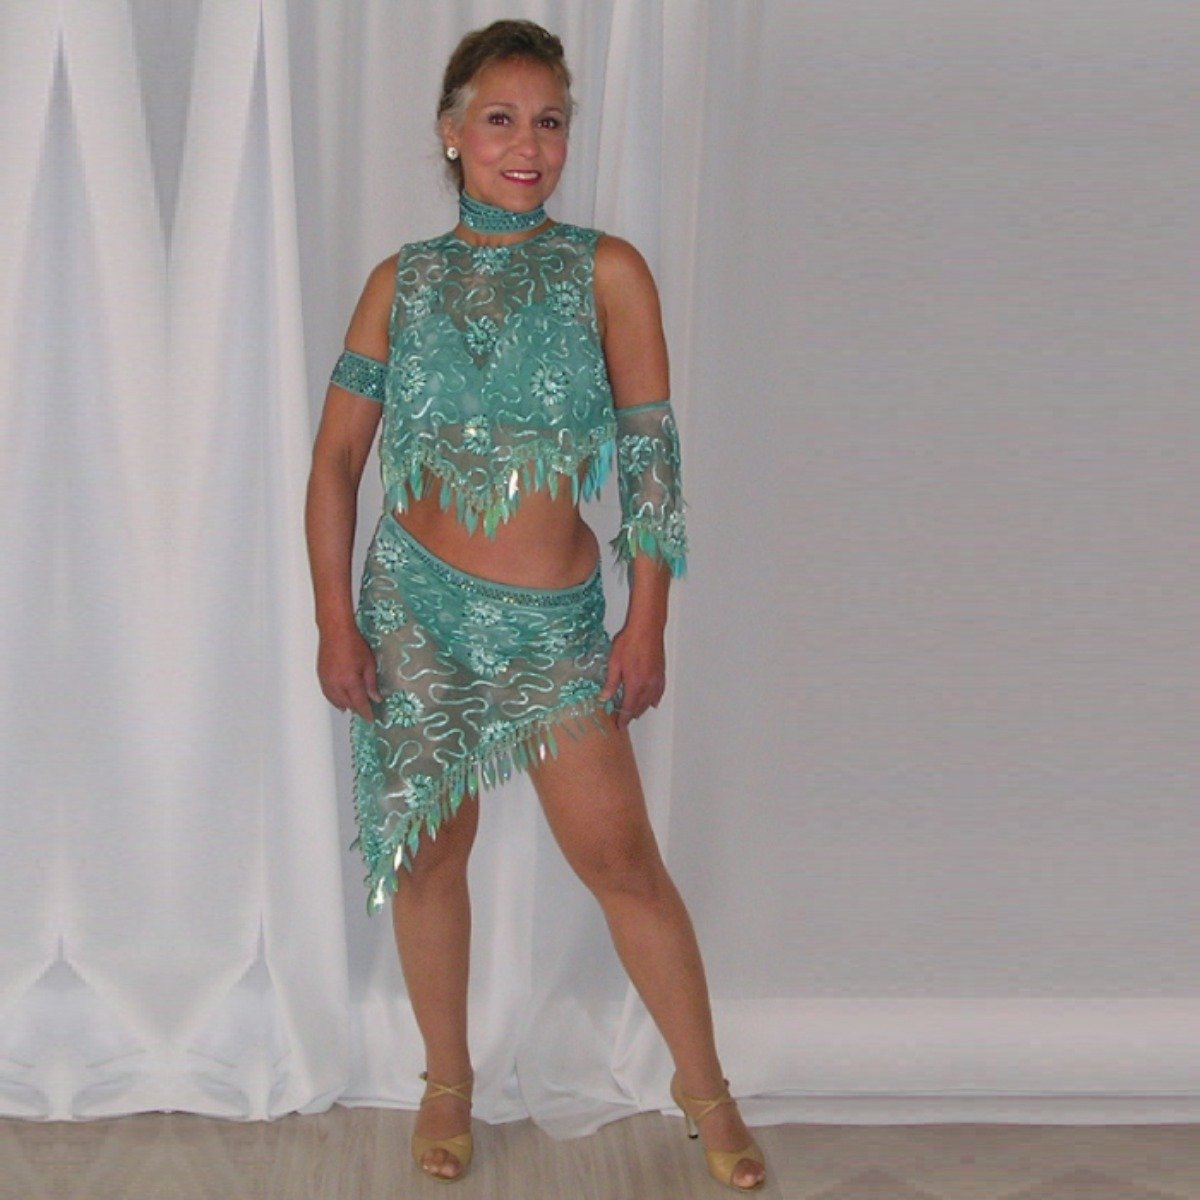 Crystal's Creations Gorgeous aqua Latin/rhythm two piece dance dress created of gorgeous aqua soutache lace fabric, embellished with about 10 gross of Aqua AB Swarovski stones with lots of hand beading & paillettes.